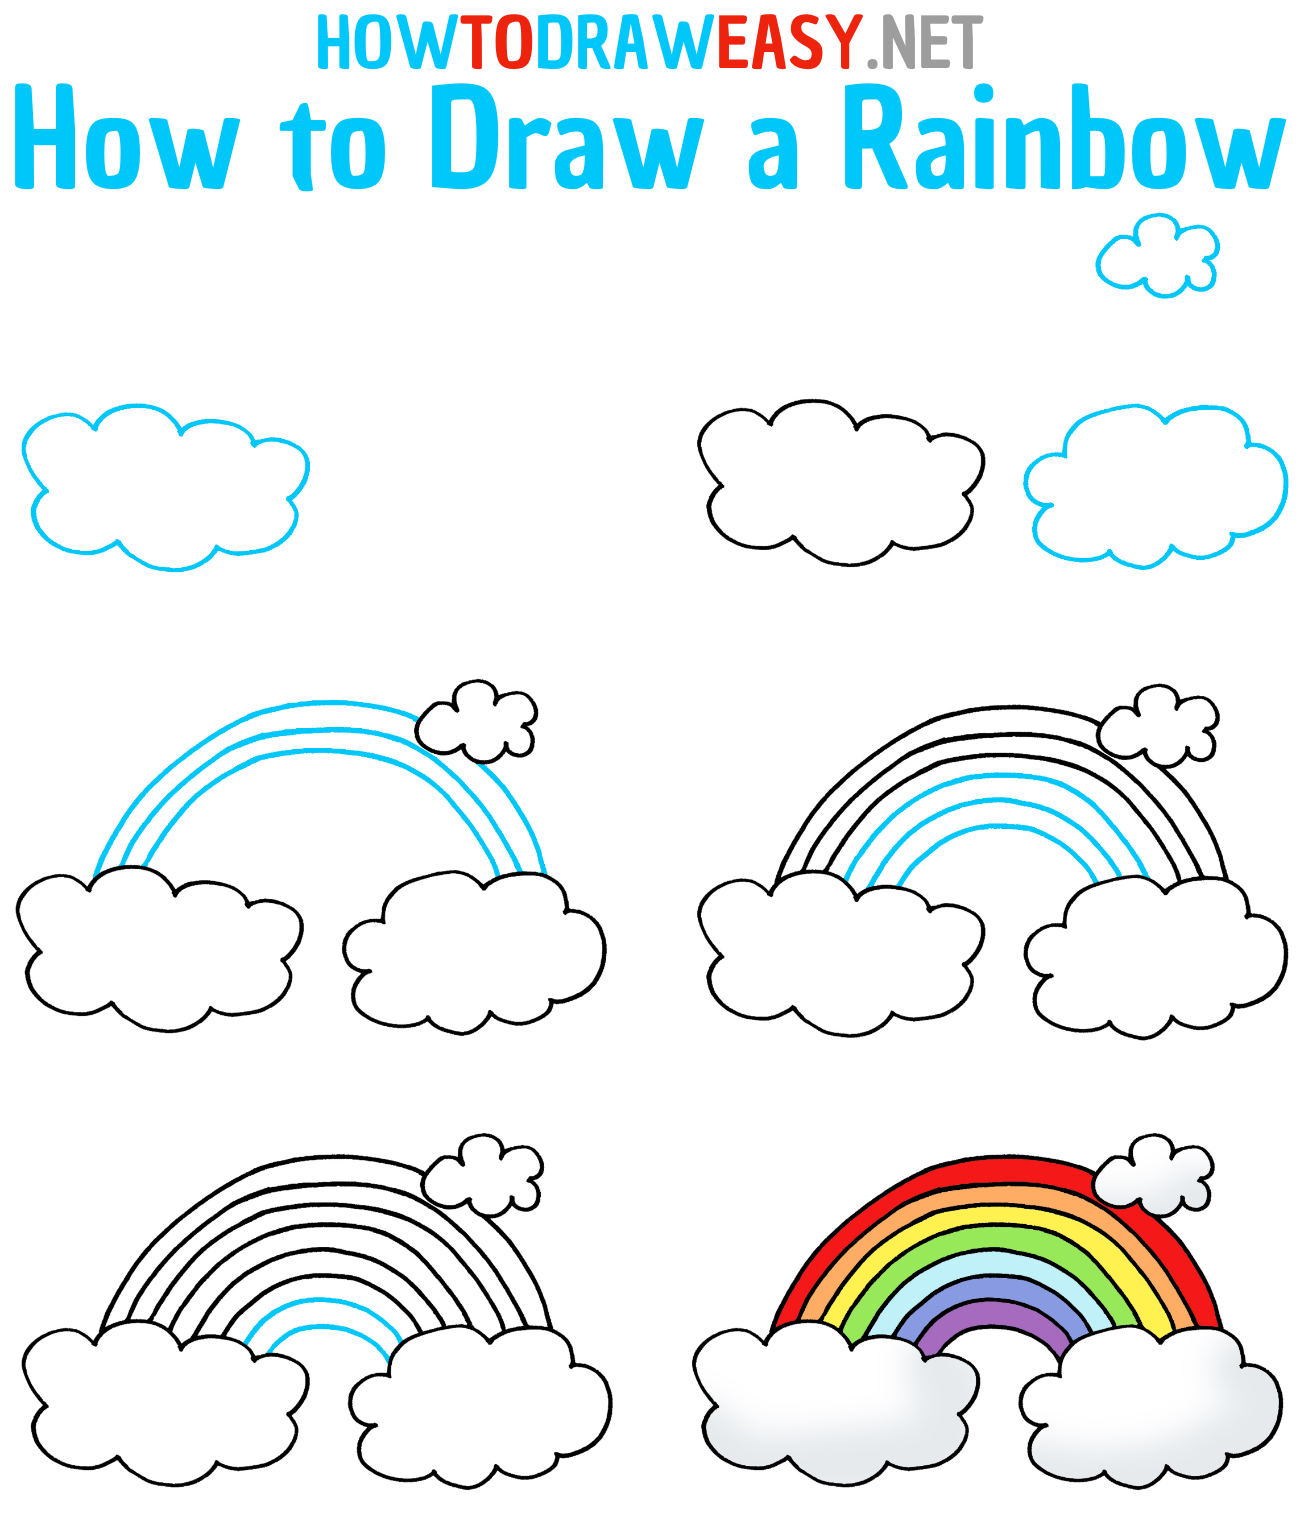 How to Draw a Rainbow Step by Step